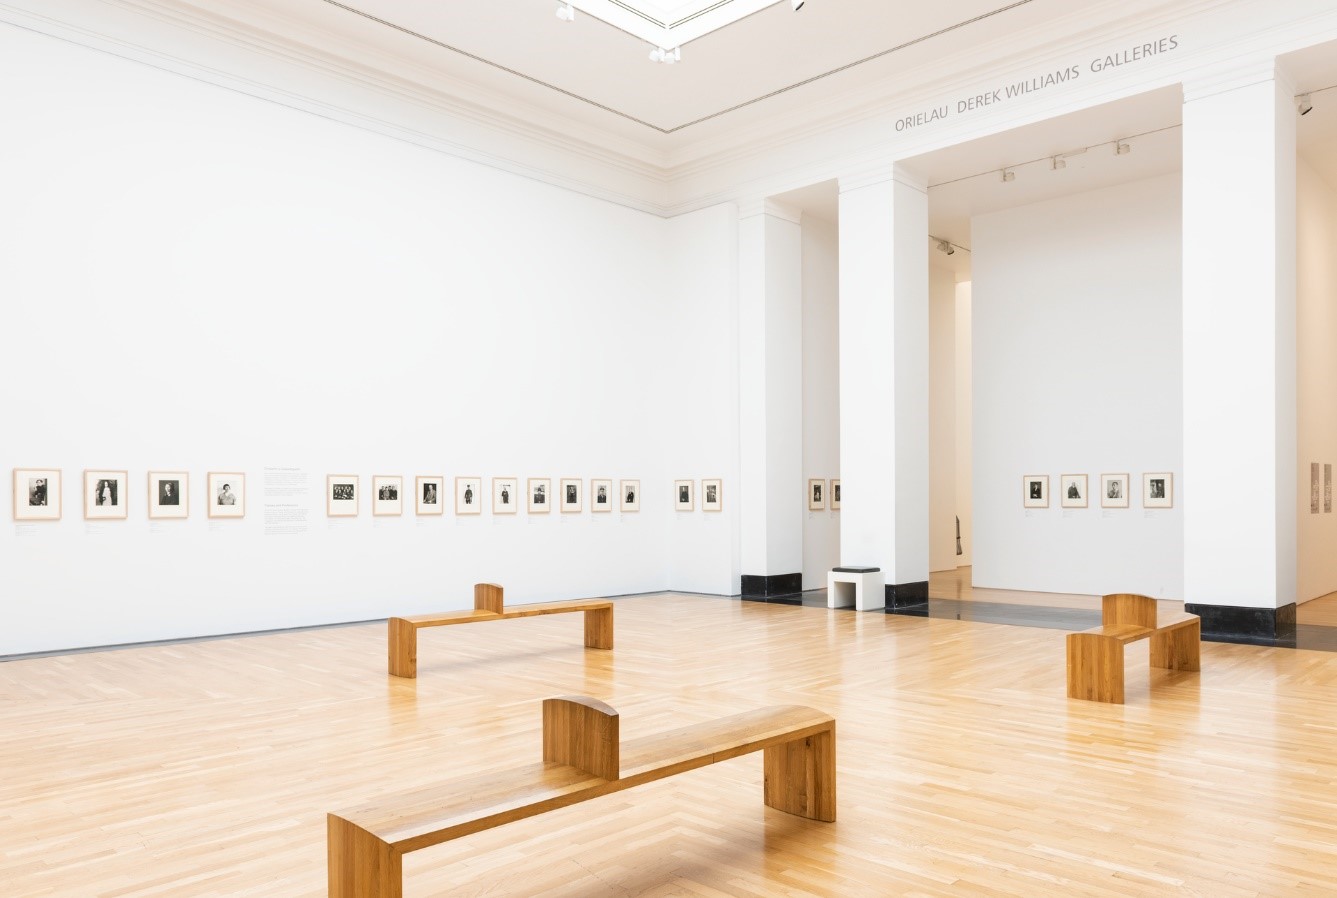 A photograph of the ARTIST ROOMS: August Sander exhibition, showing the entire gallery with small photos on the walls and wooden benches in the middle